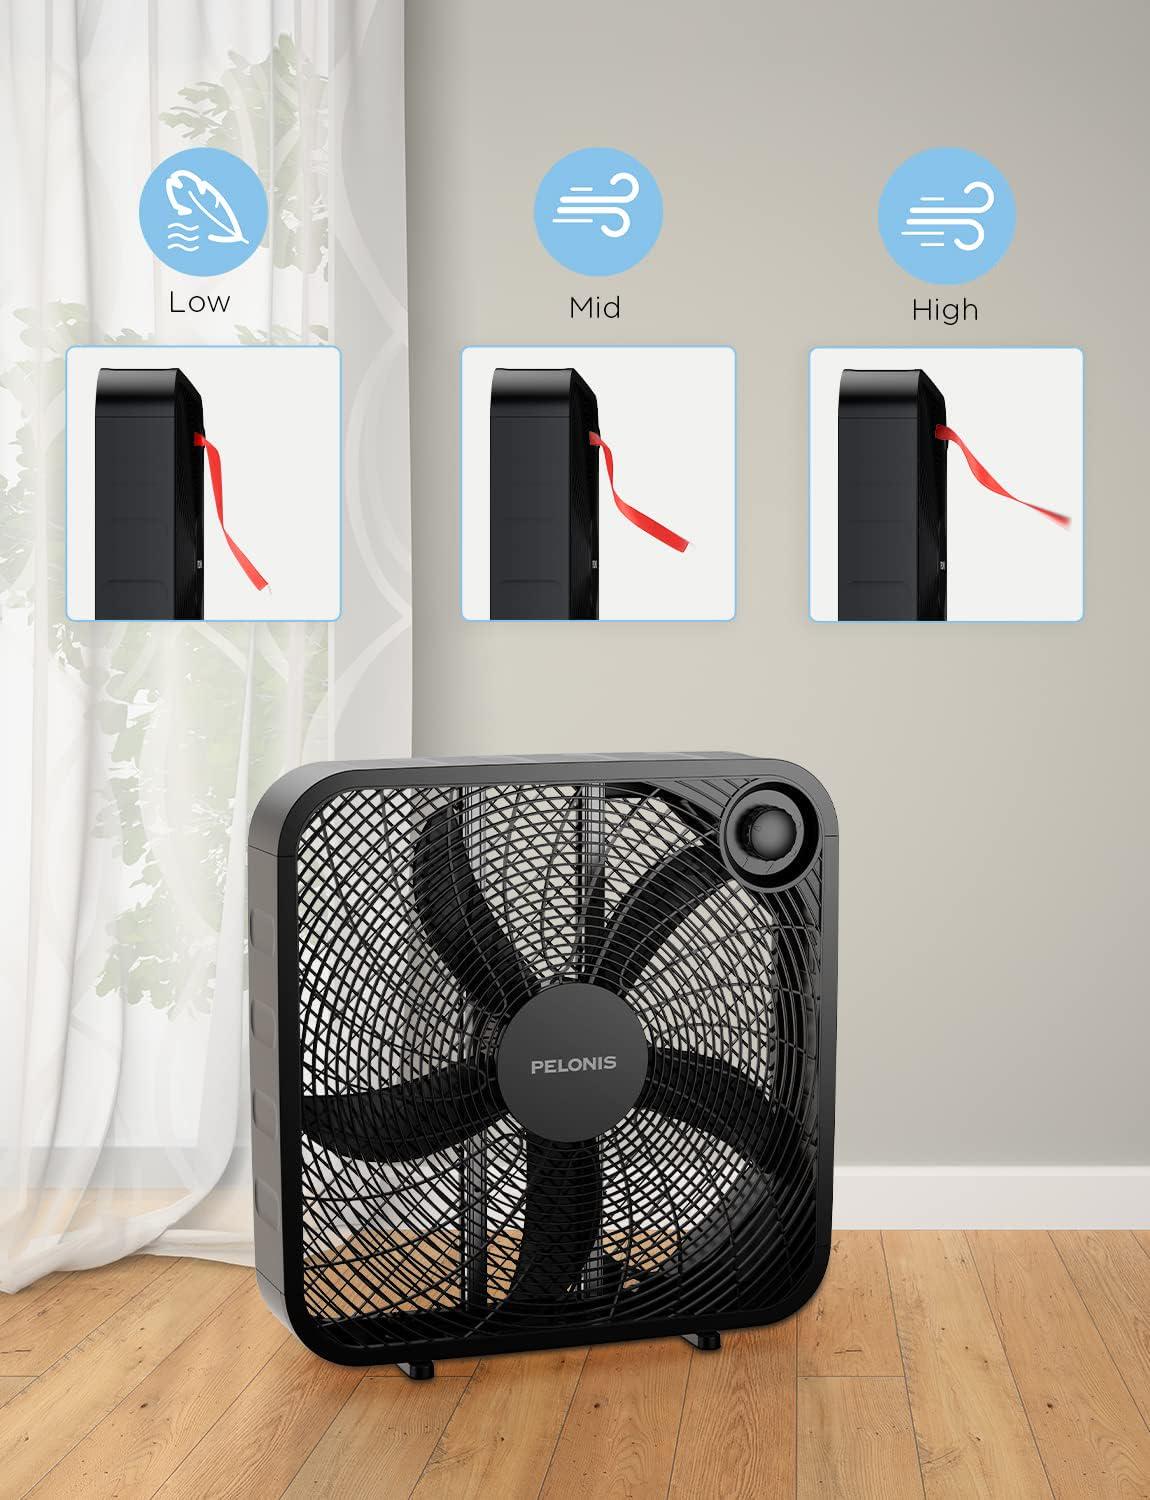 3-Speed Box Fan For Full-Force Circulation With Air Conditioner, Upgrade Floor Fan, Black